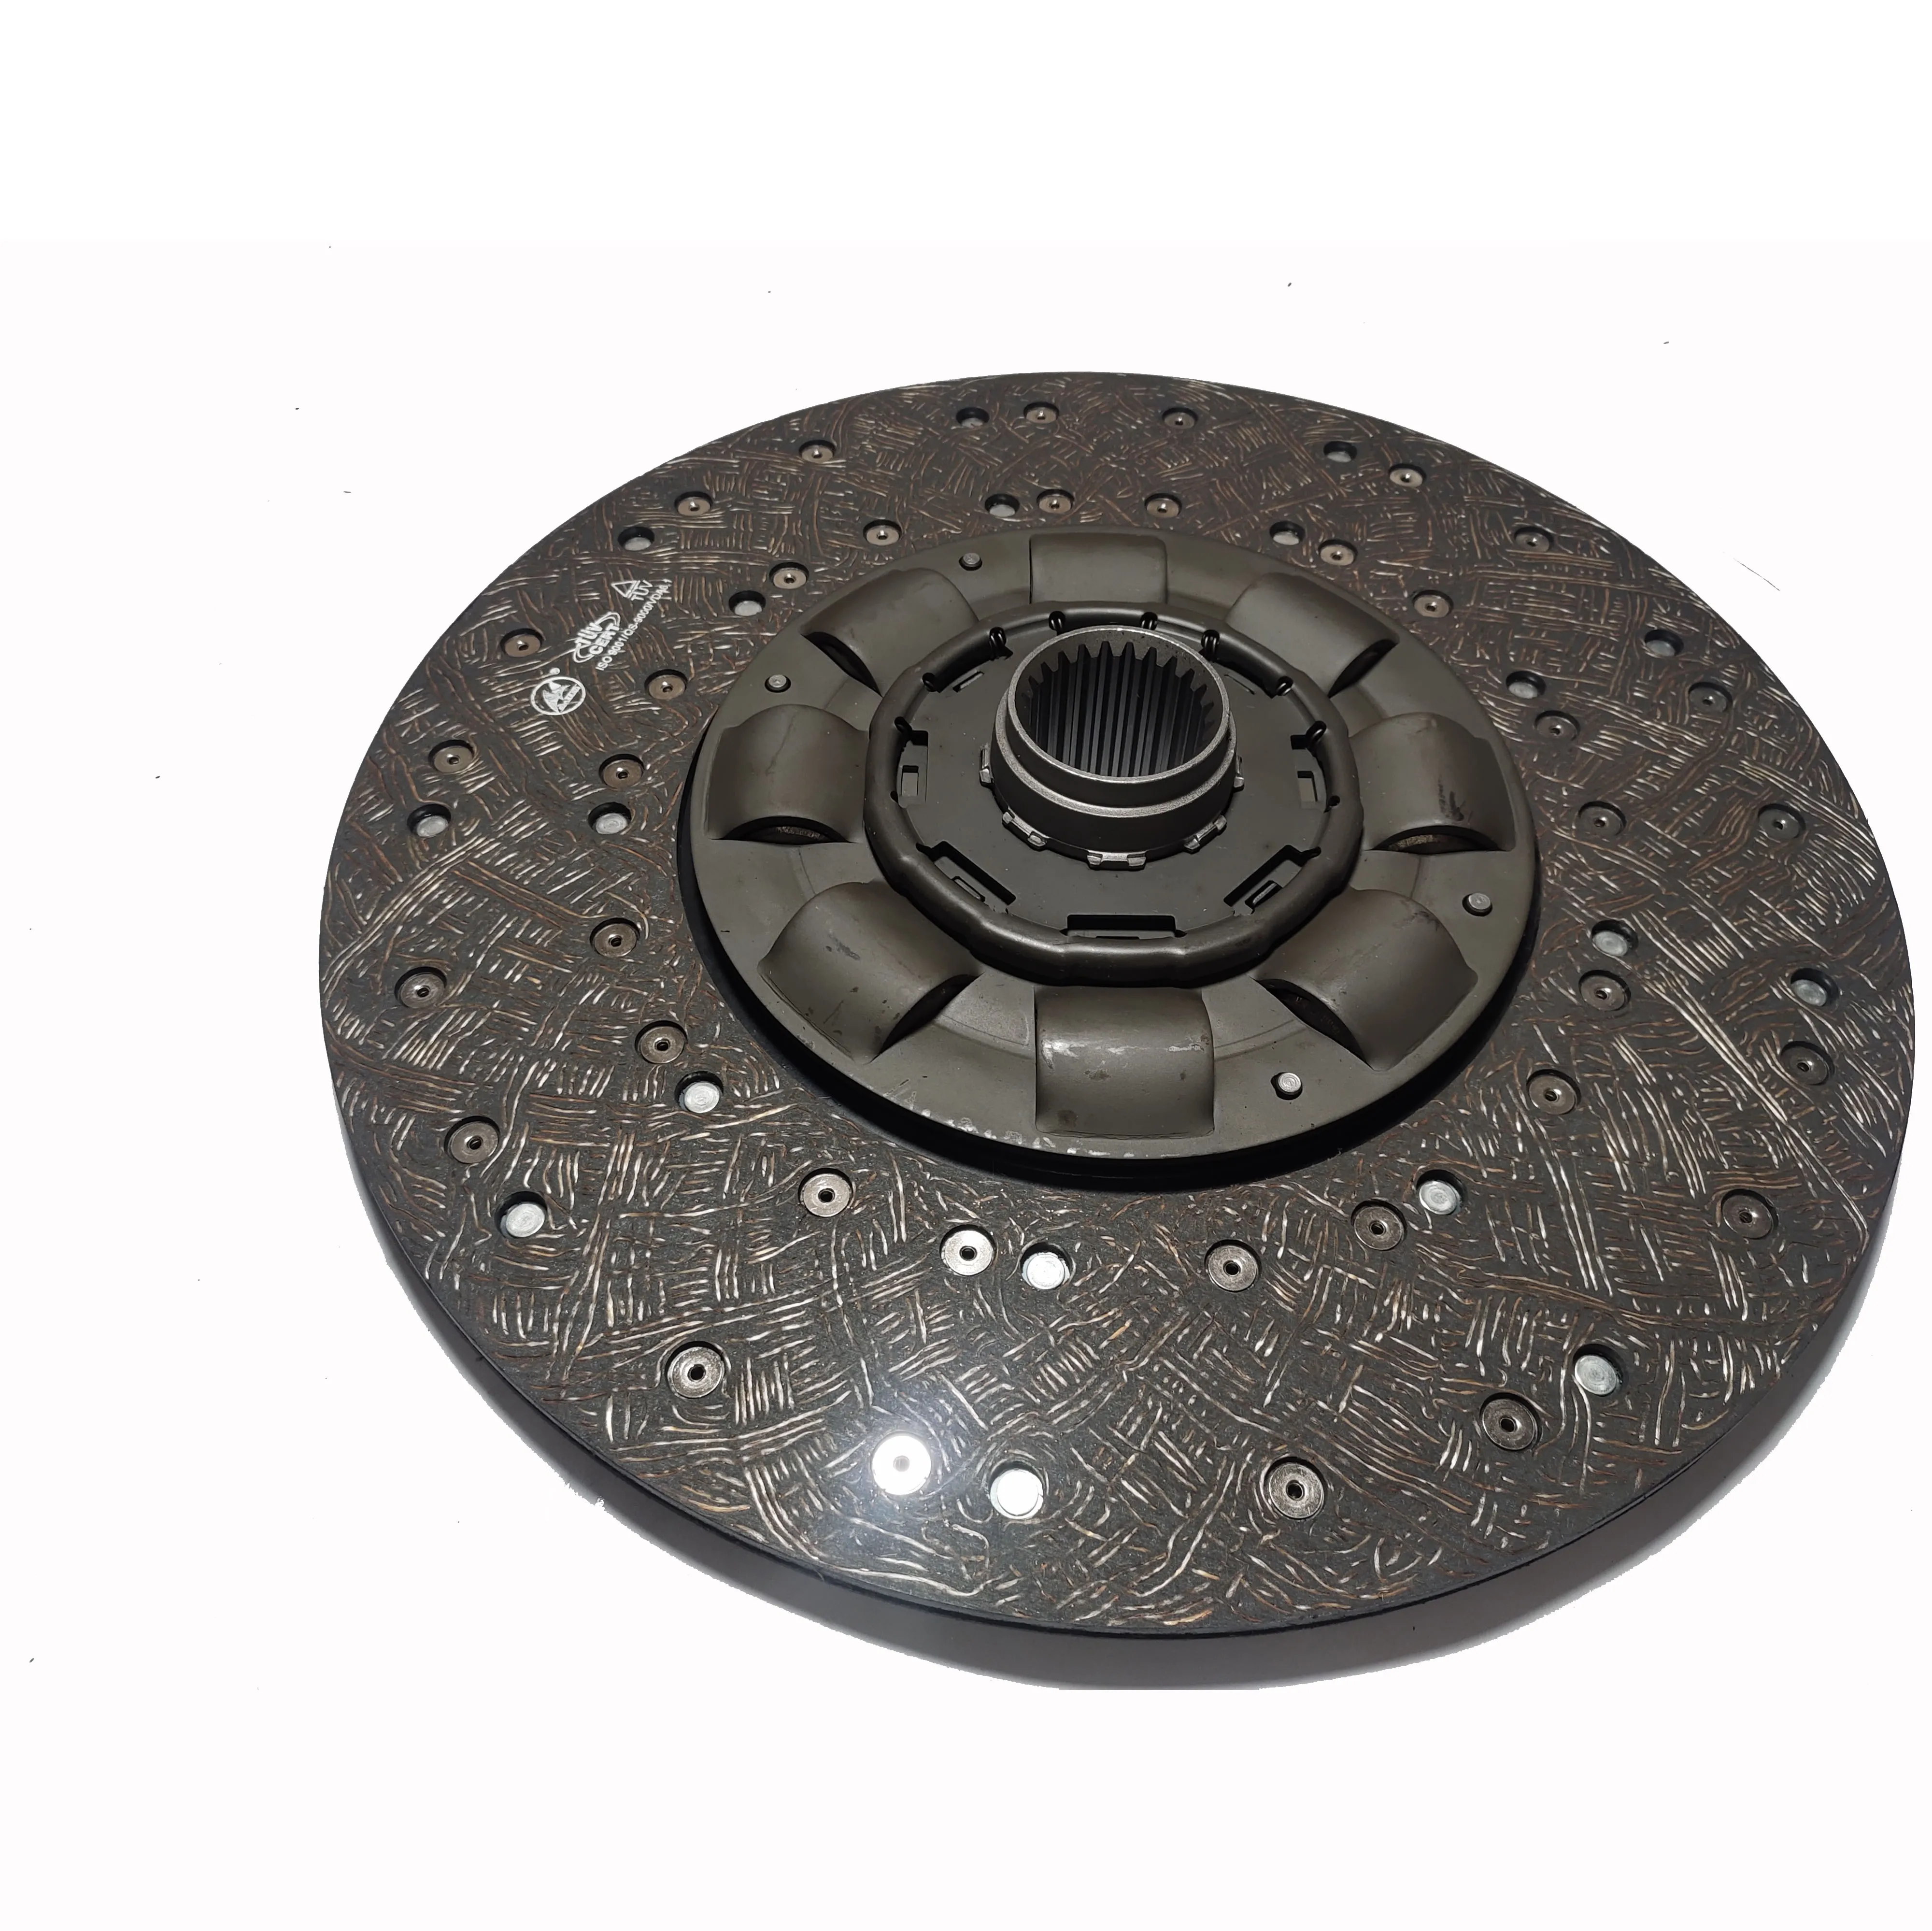 

Clutch Disc 1878 037 631 Size 430mm suitable for Scania with Maxeen No. M04 430 05